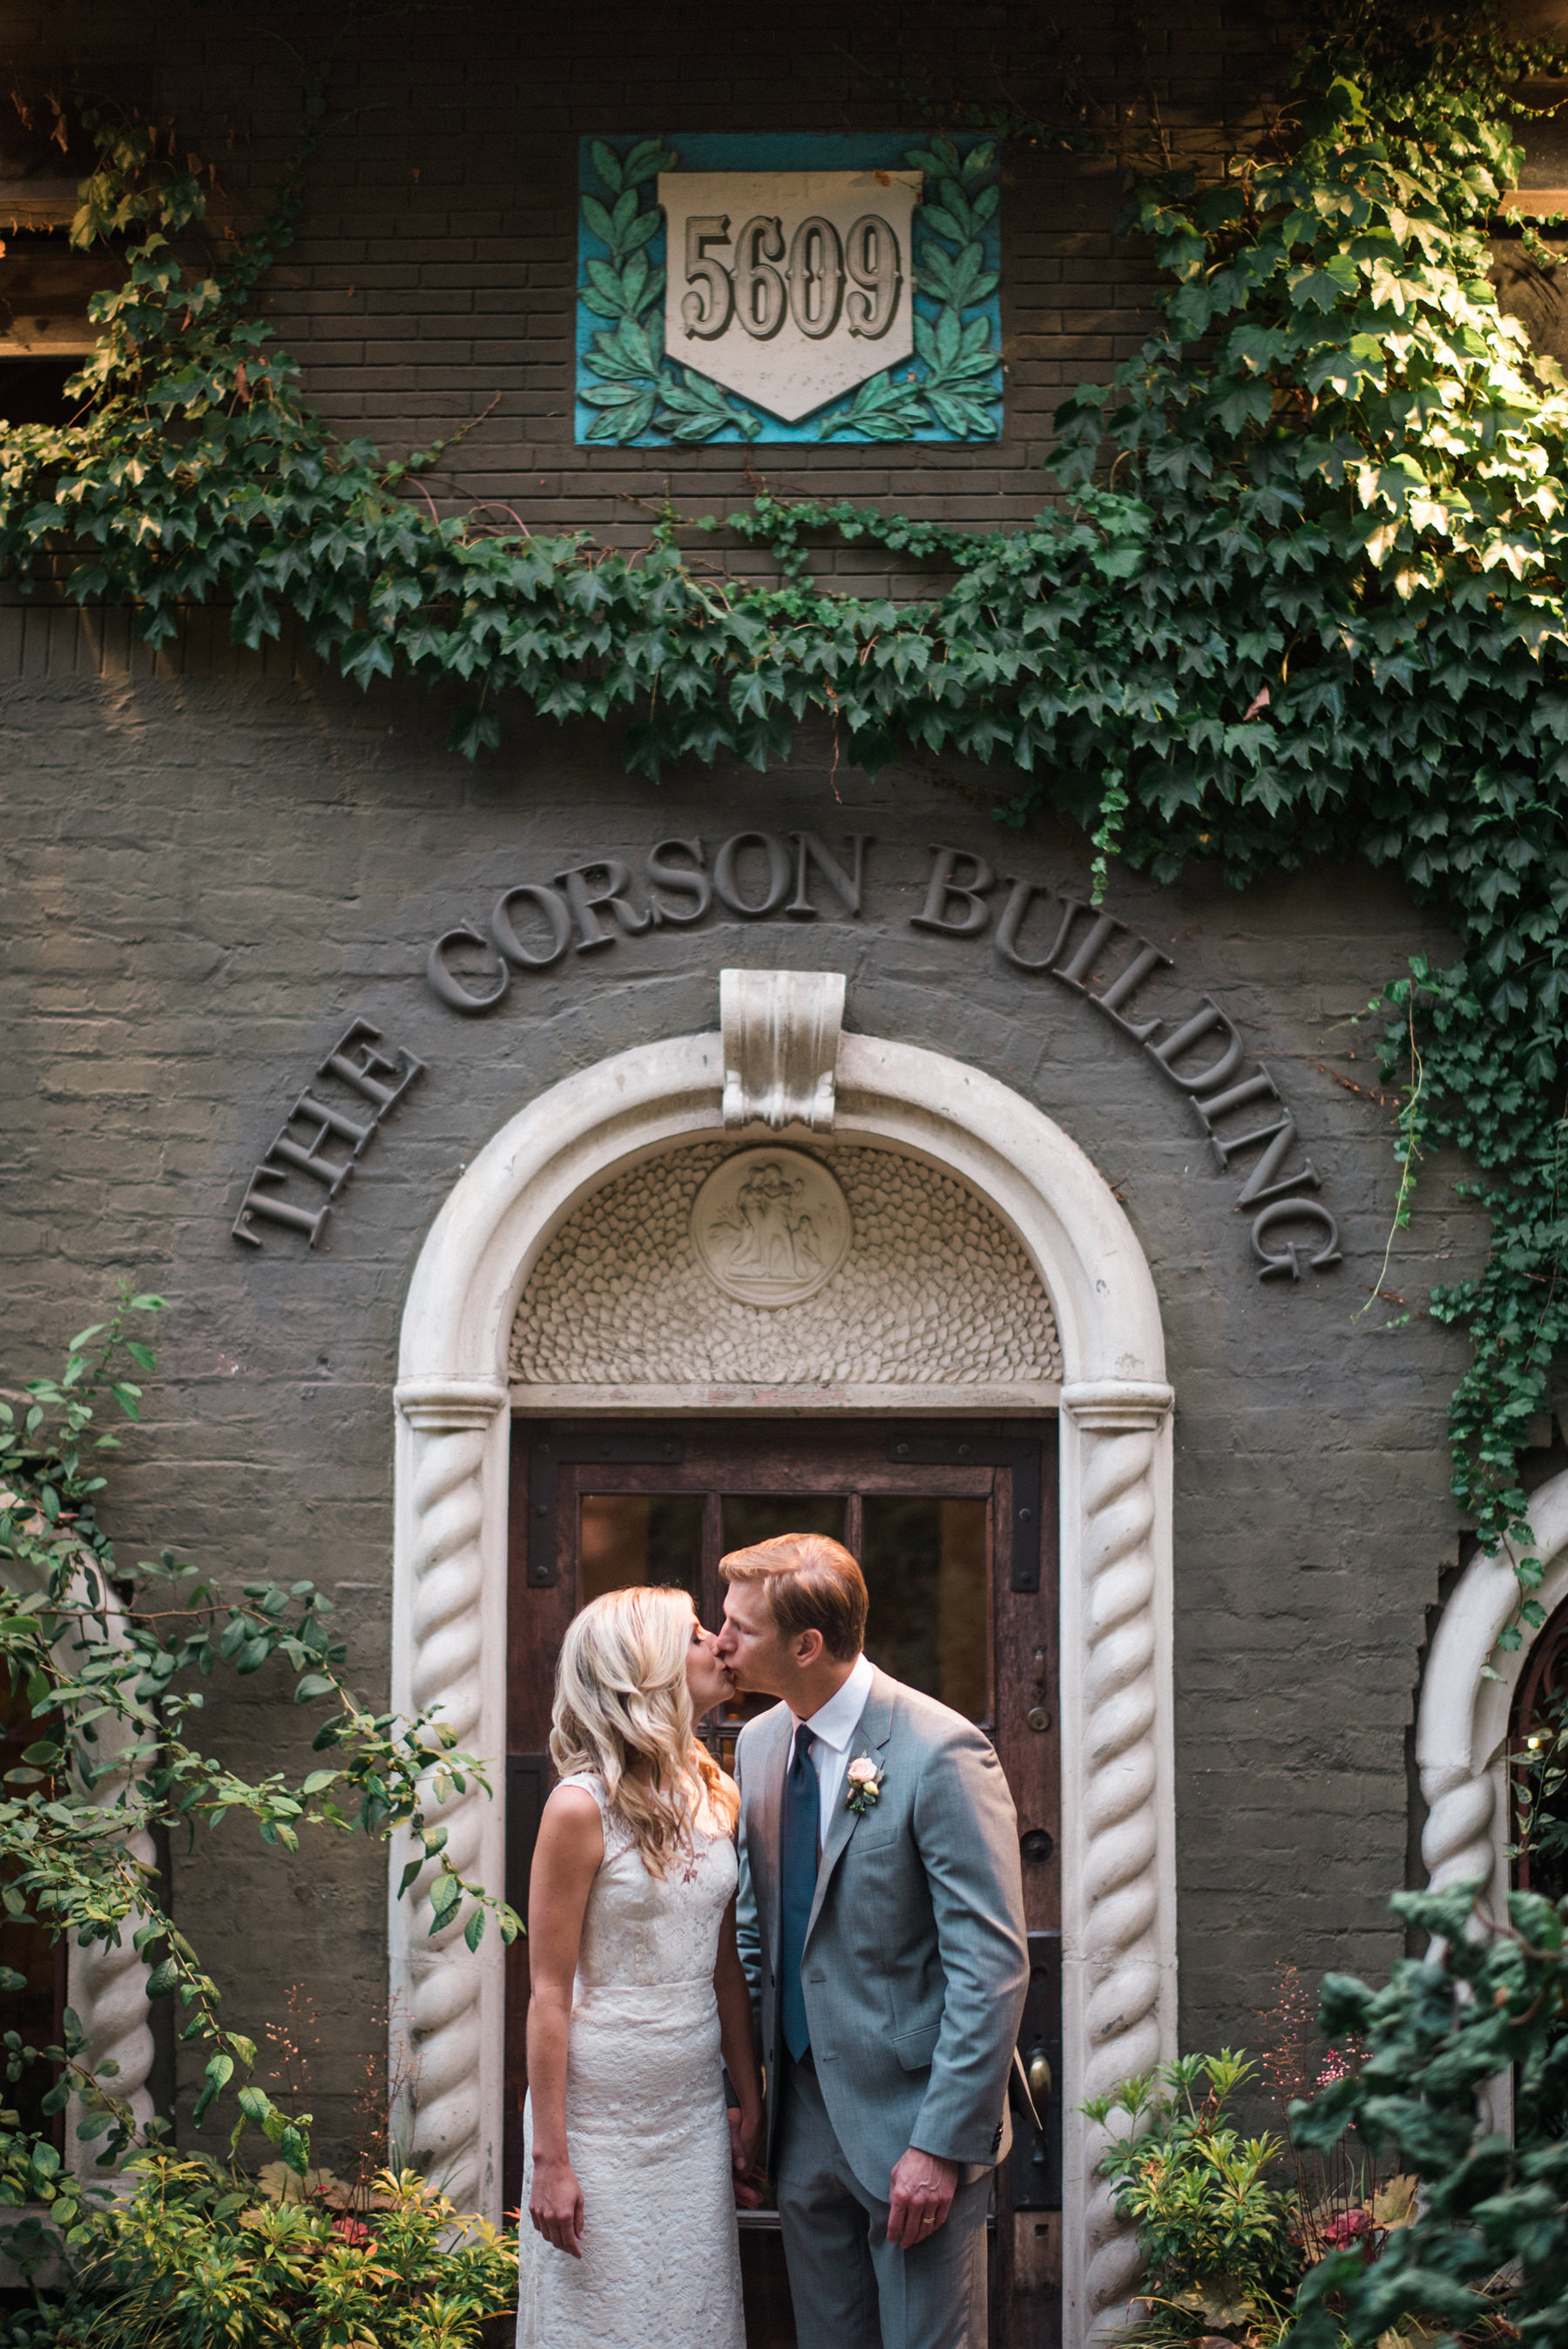 225-outdoor-wedding-at-the-corson-building-in-seattle.jpg